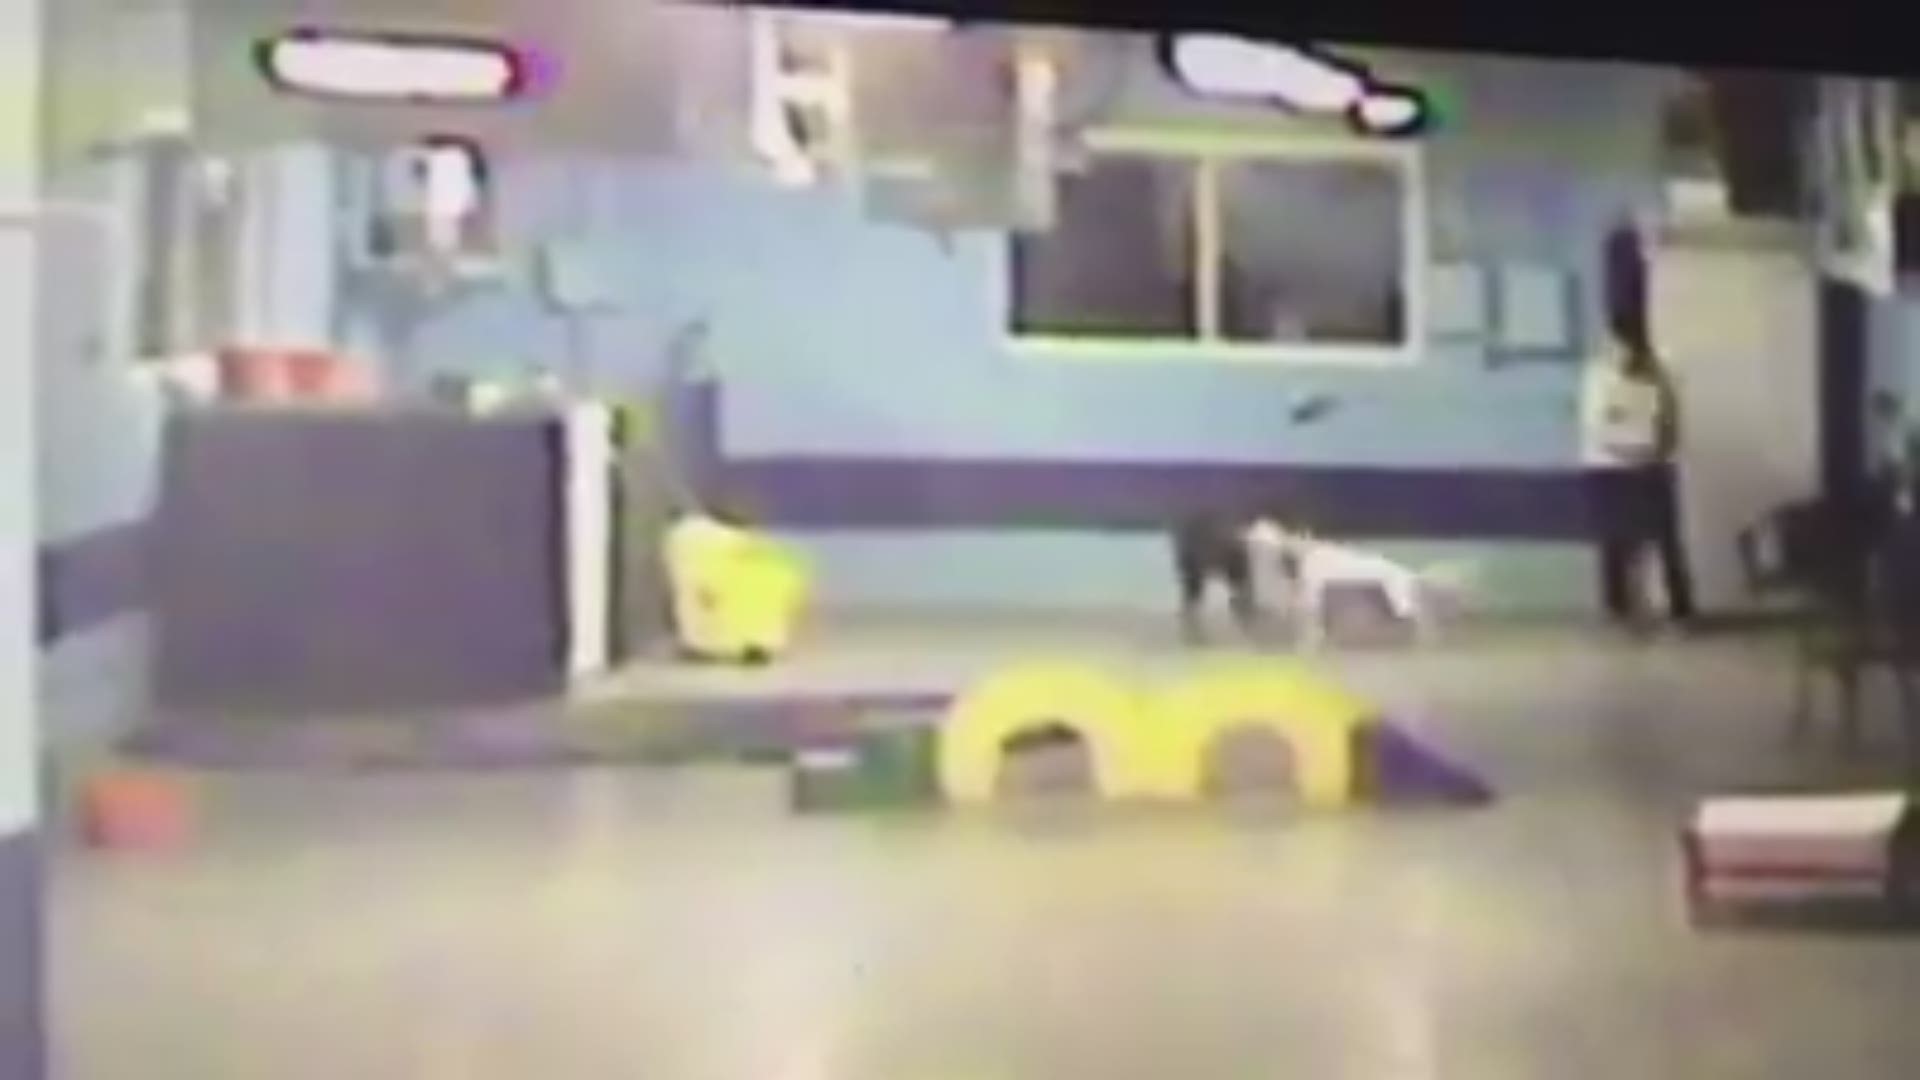 Facebook video allege dog abuse at Tallmadge dog daycare